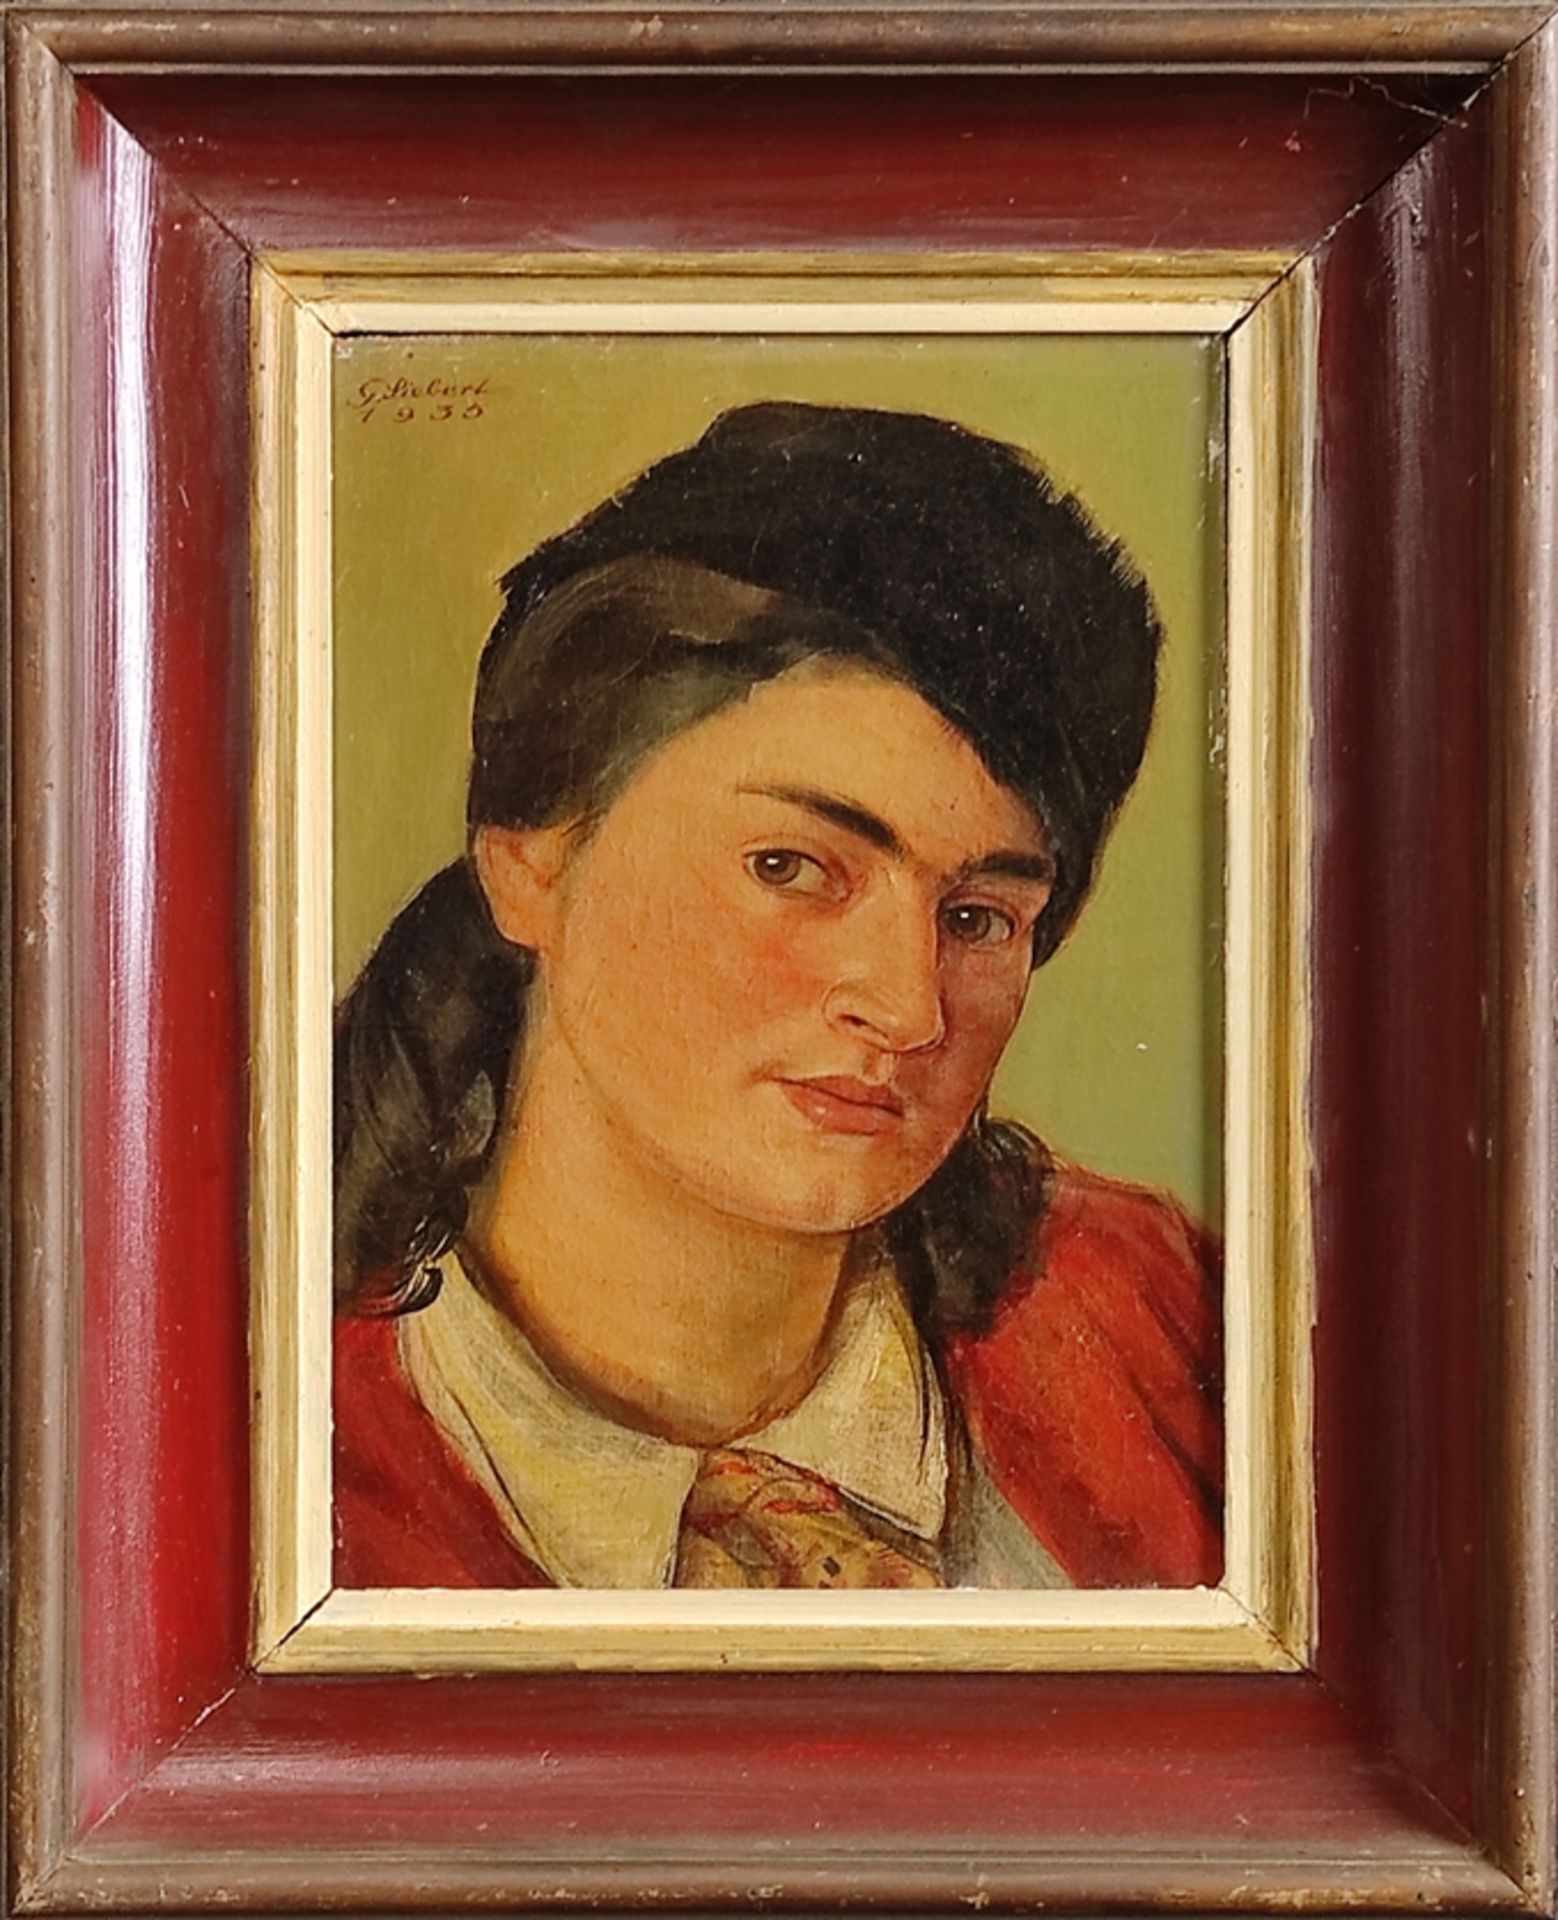 Siebert, Georg (1896 Dresden - 1984 Cologne) "Rosi", lady with cap, signed upper left and dated 193 - Image 2 of 4